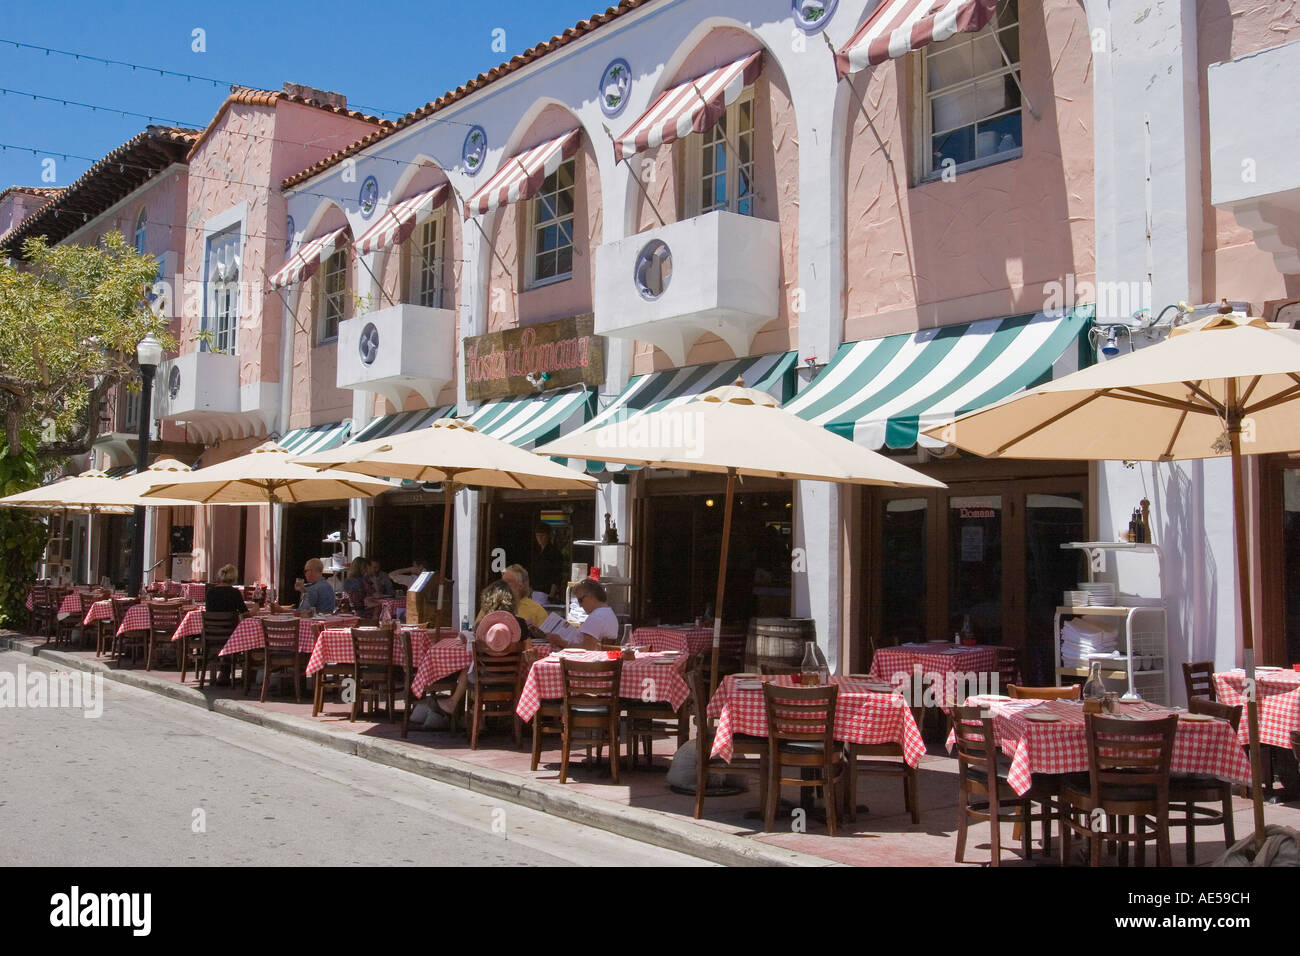 Customers dining at outdoor tables of Italian restaurant on Espanola Way in South Beach, Miami, Florida Stock Photo